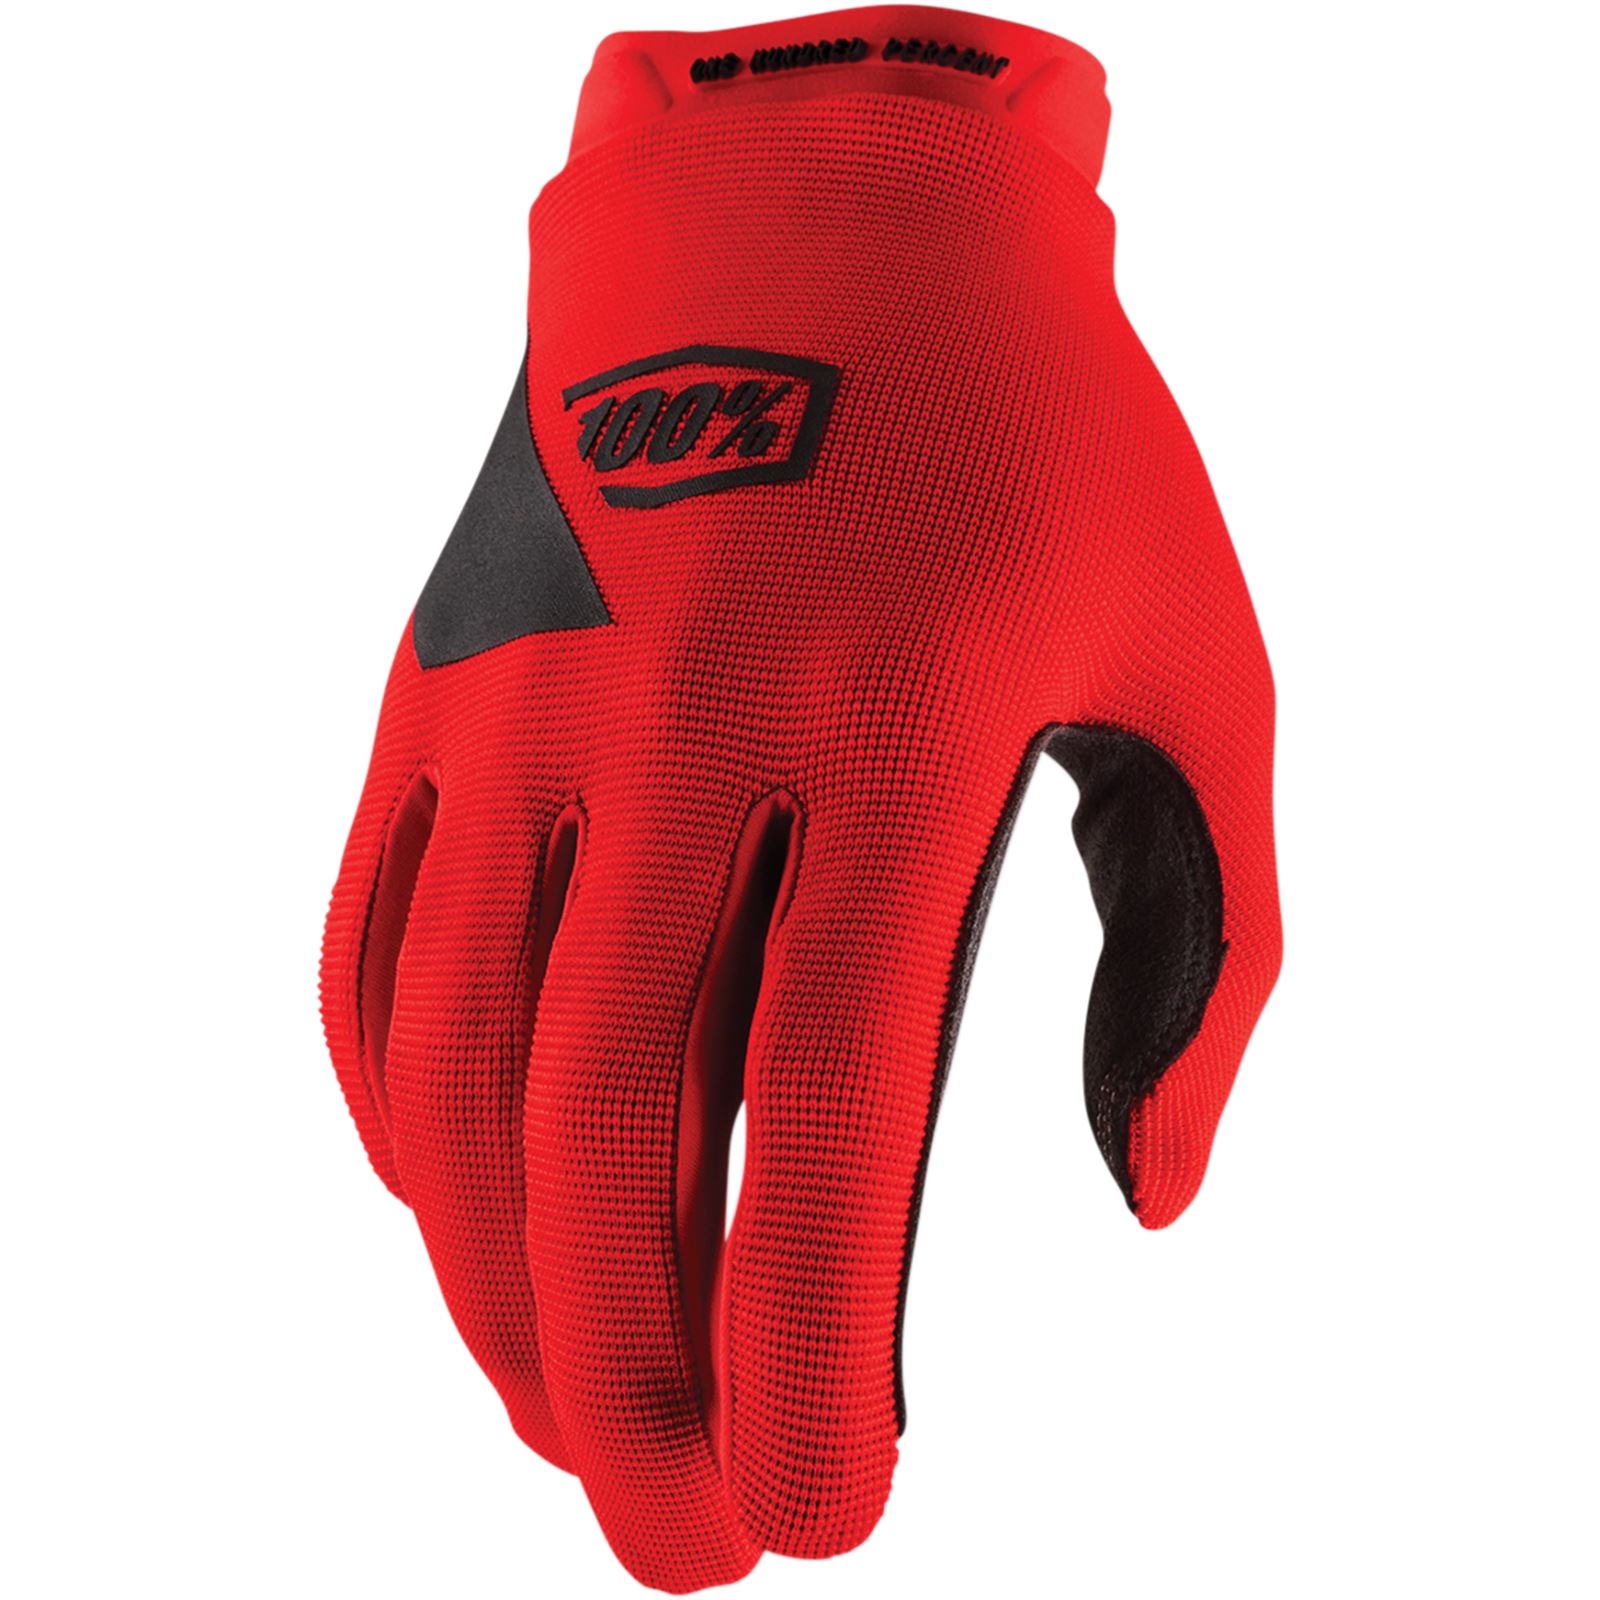 100% Ridecamp Glove - Red - 2X-Large 